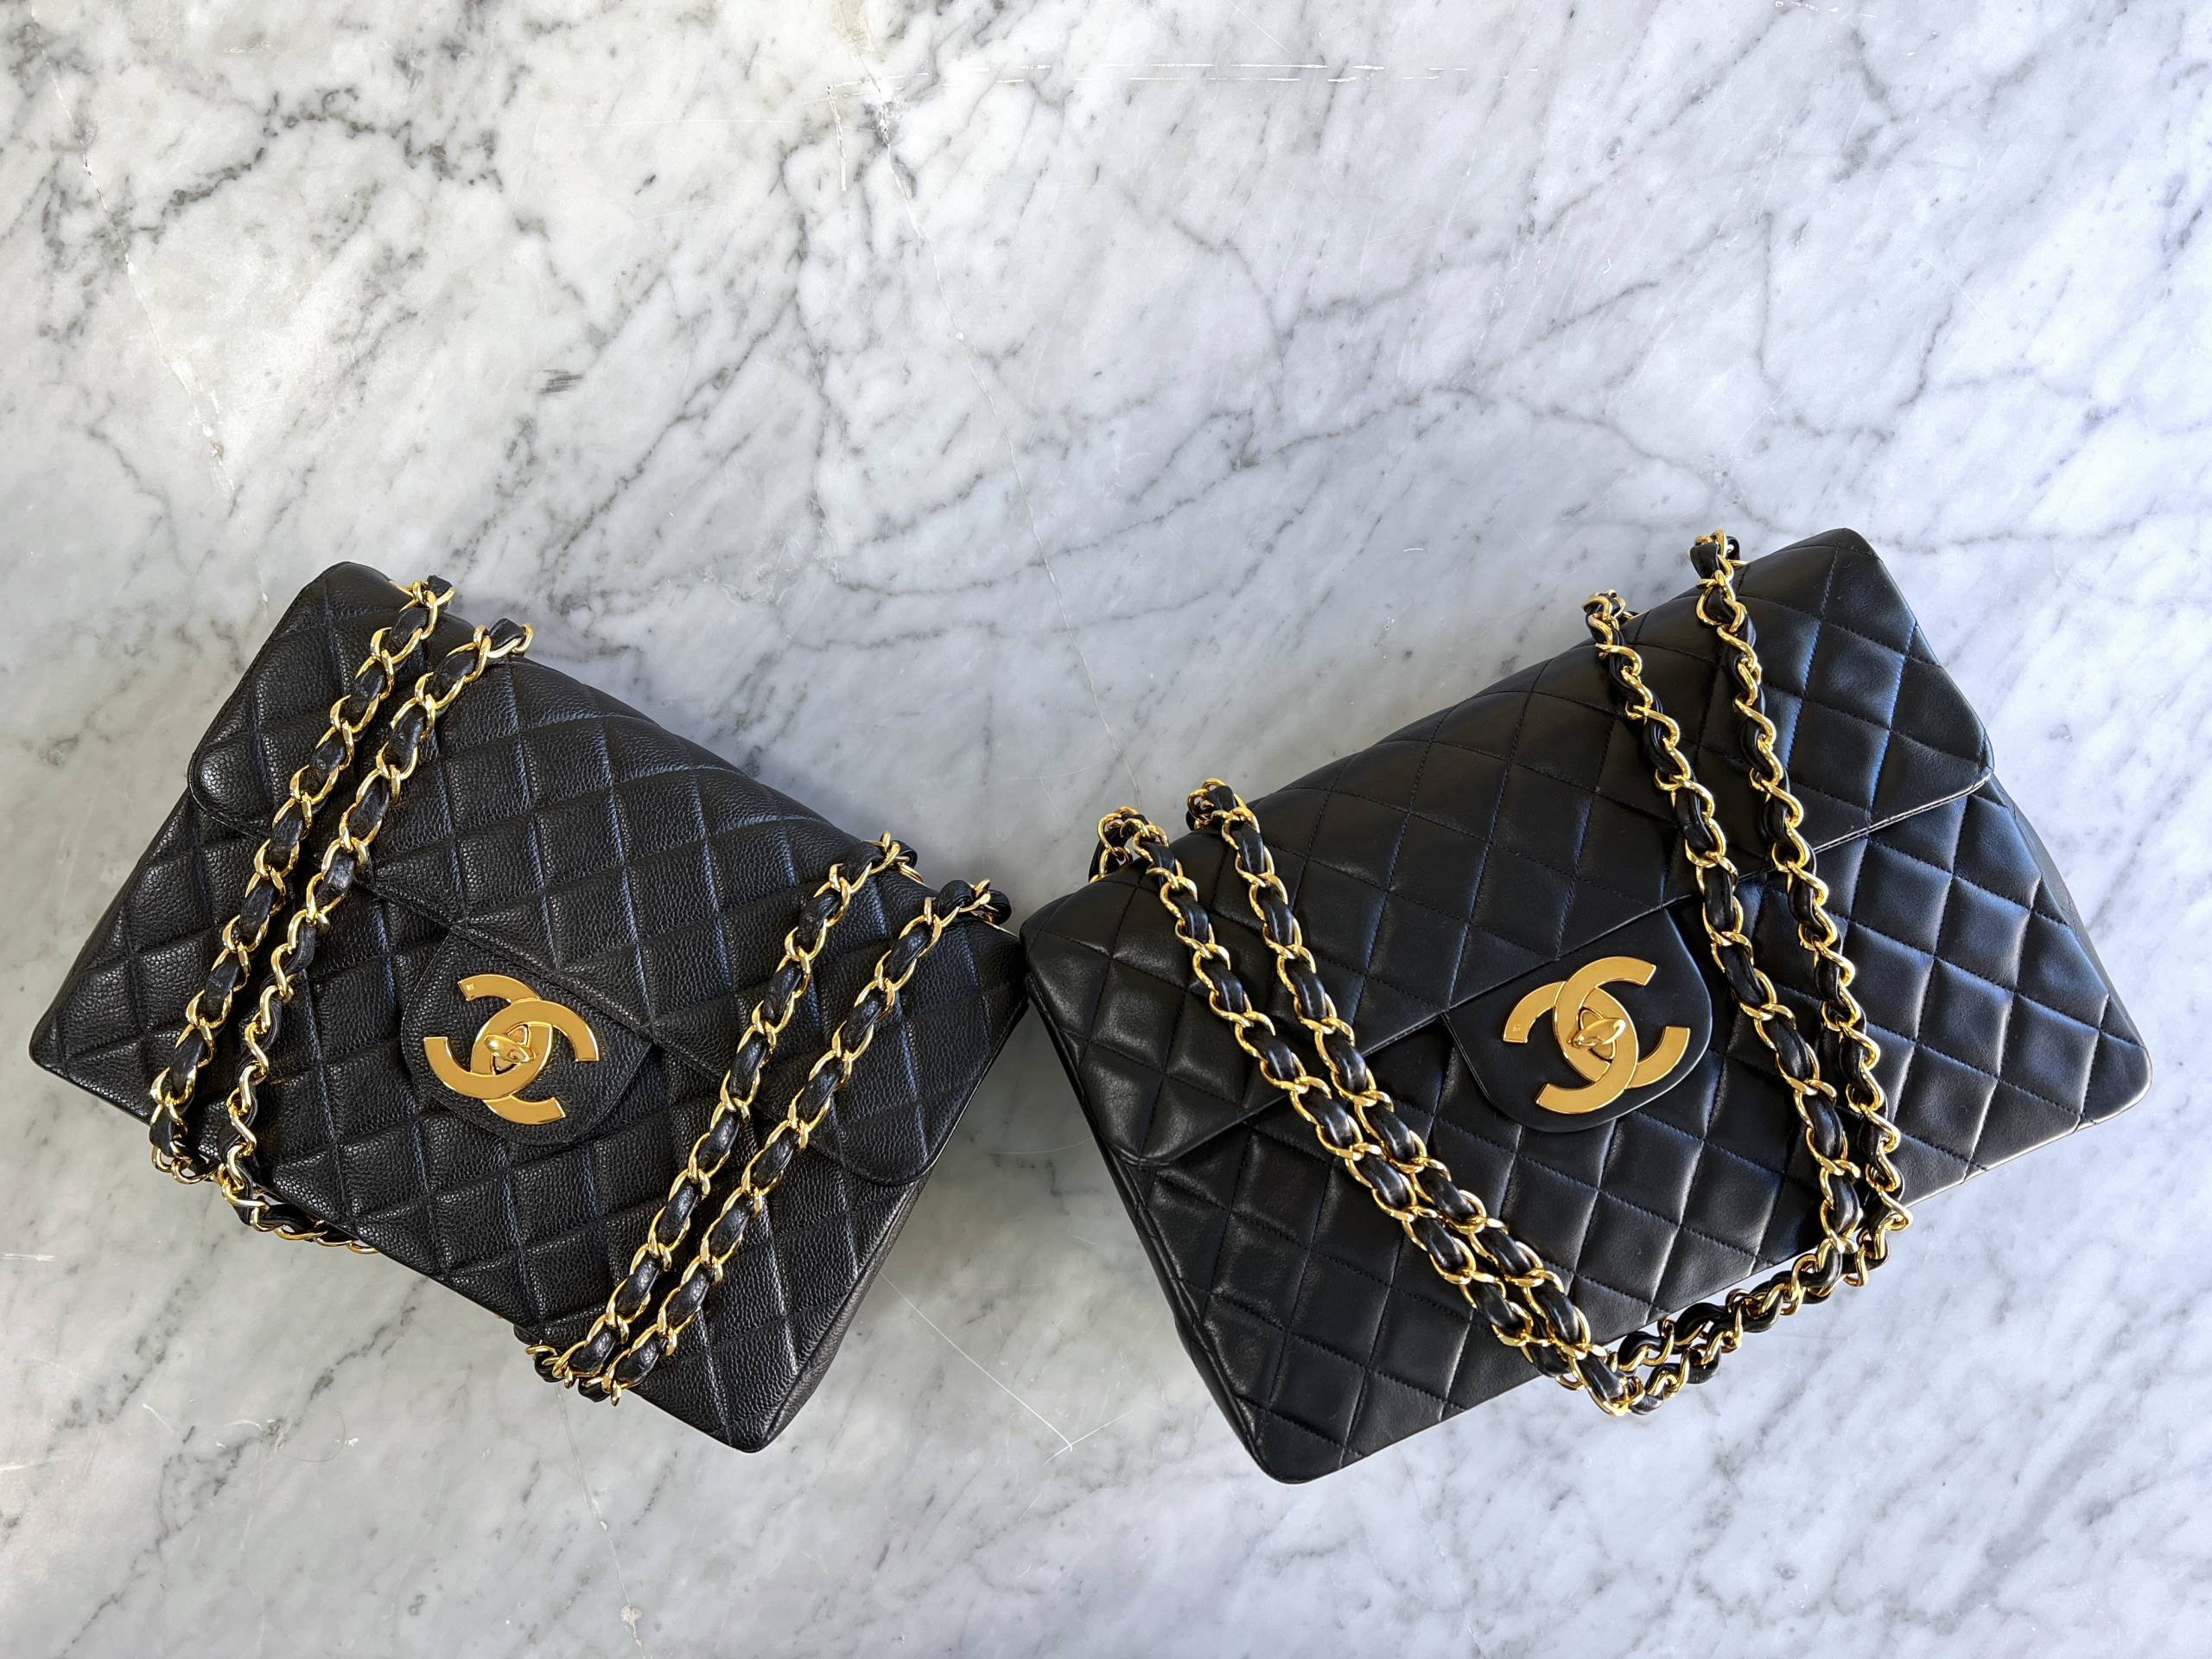 Vintage Chanel Bag Buying Guide Things to Know Before Purchasing   Bagaholic